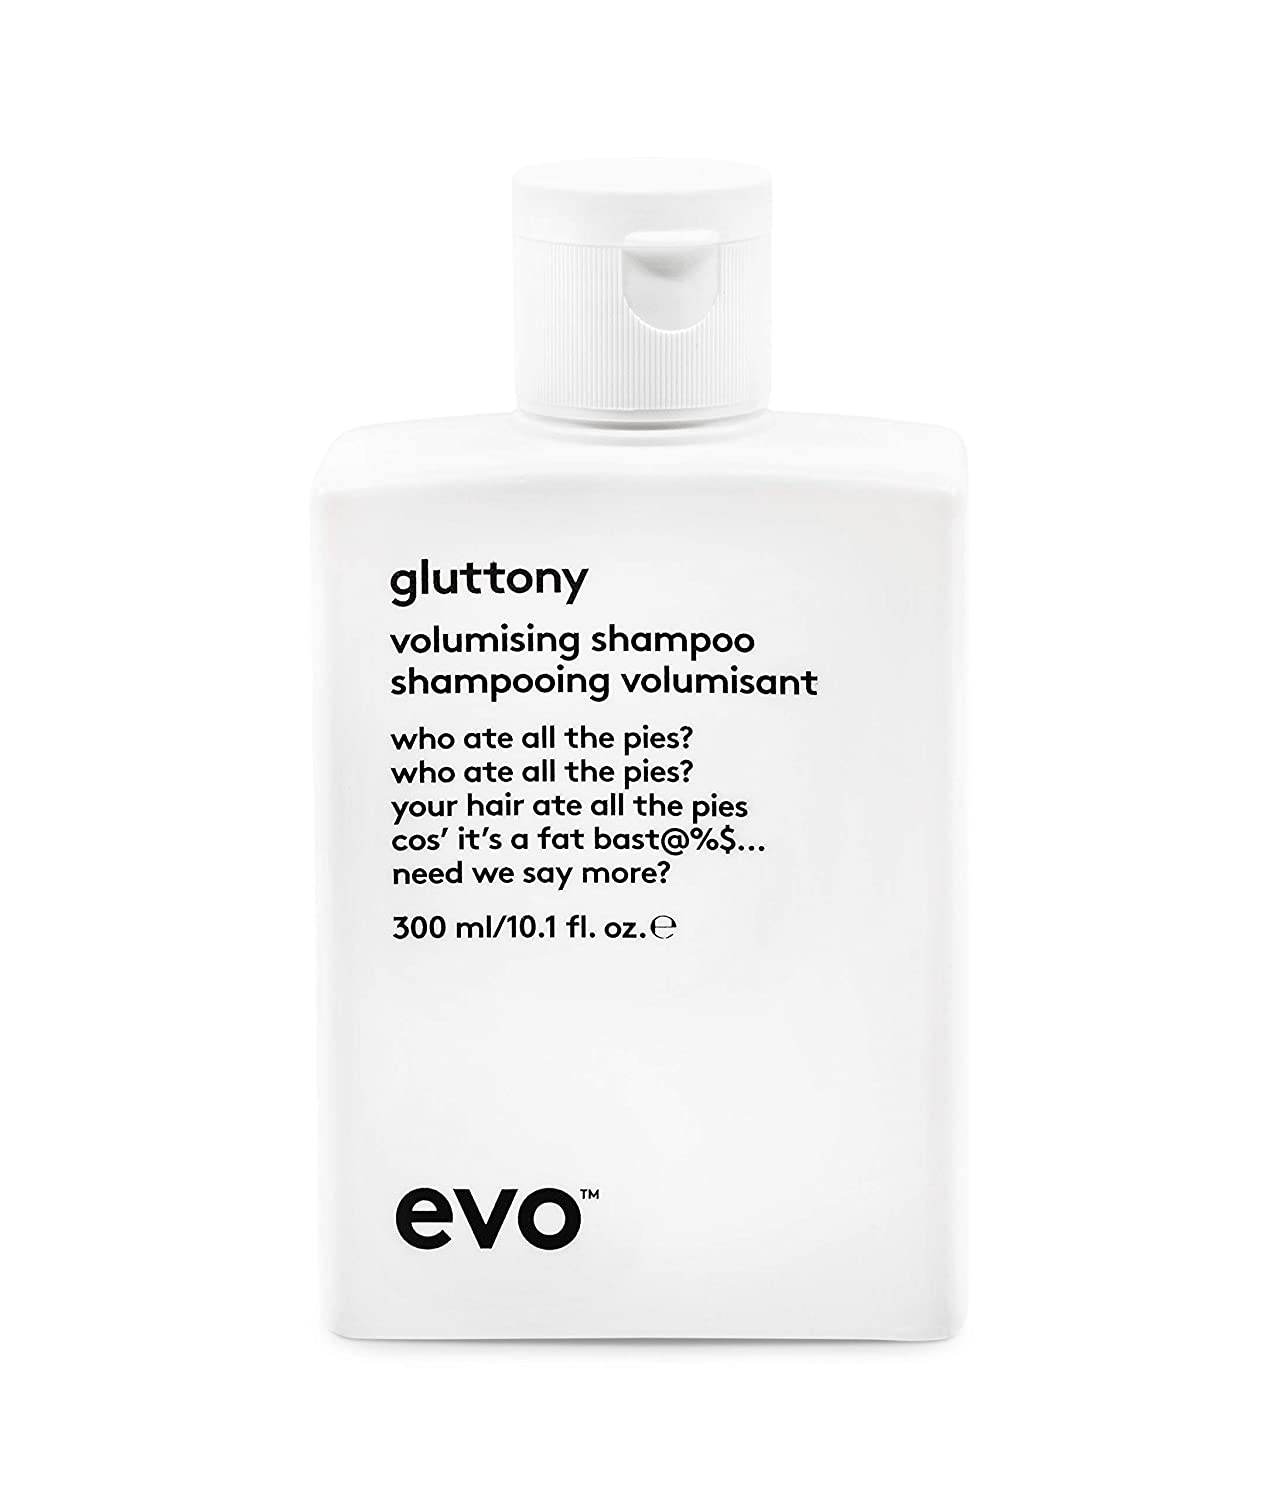  4. EVO Gluttony Volumising Shampoo is the best for quick results. 